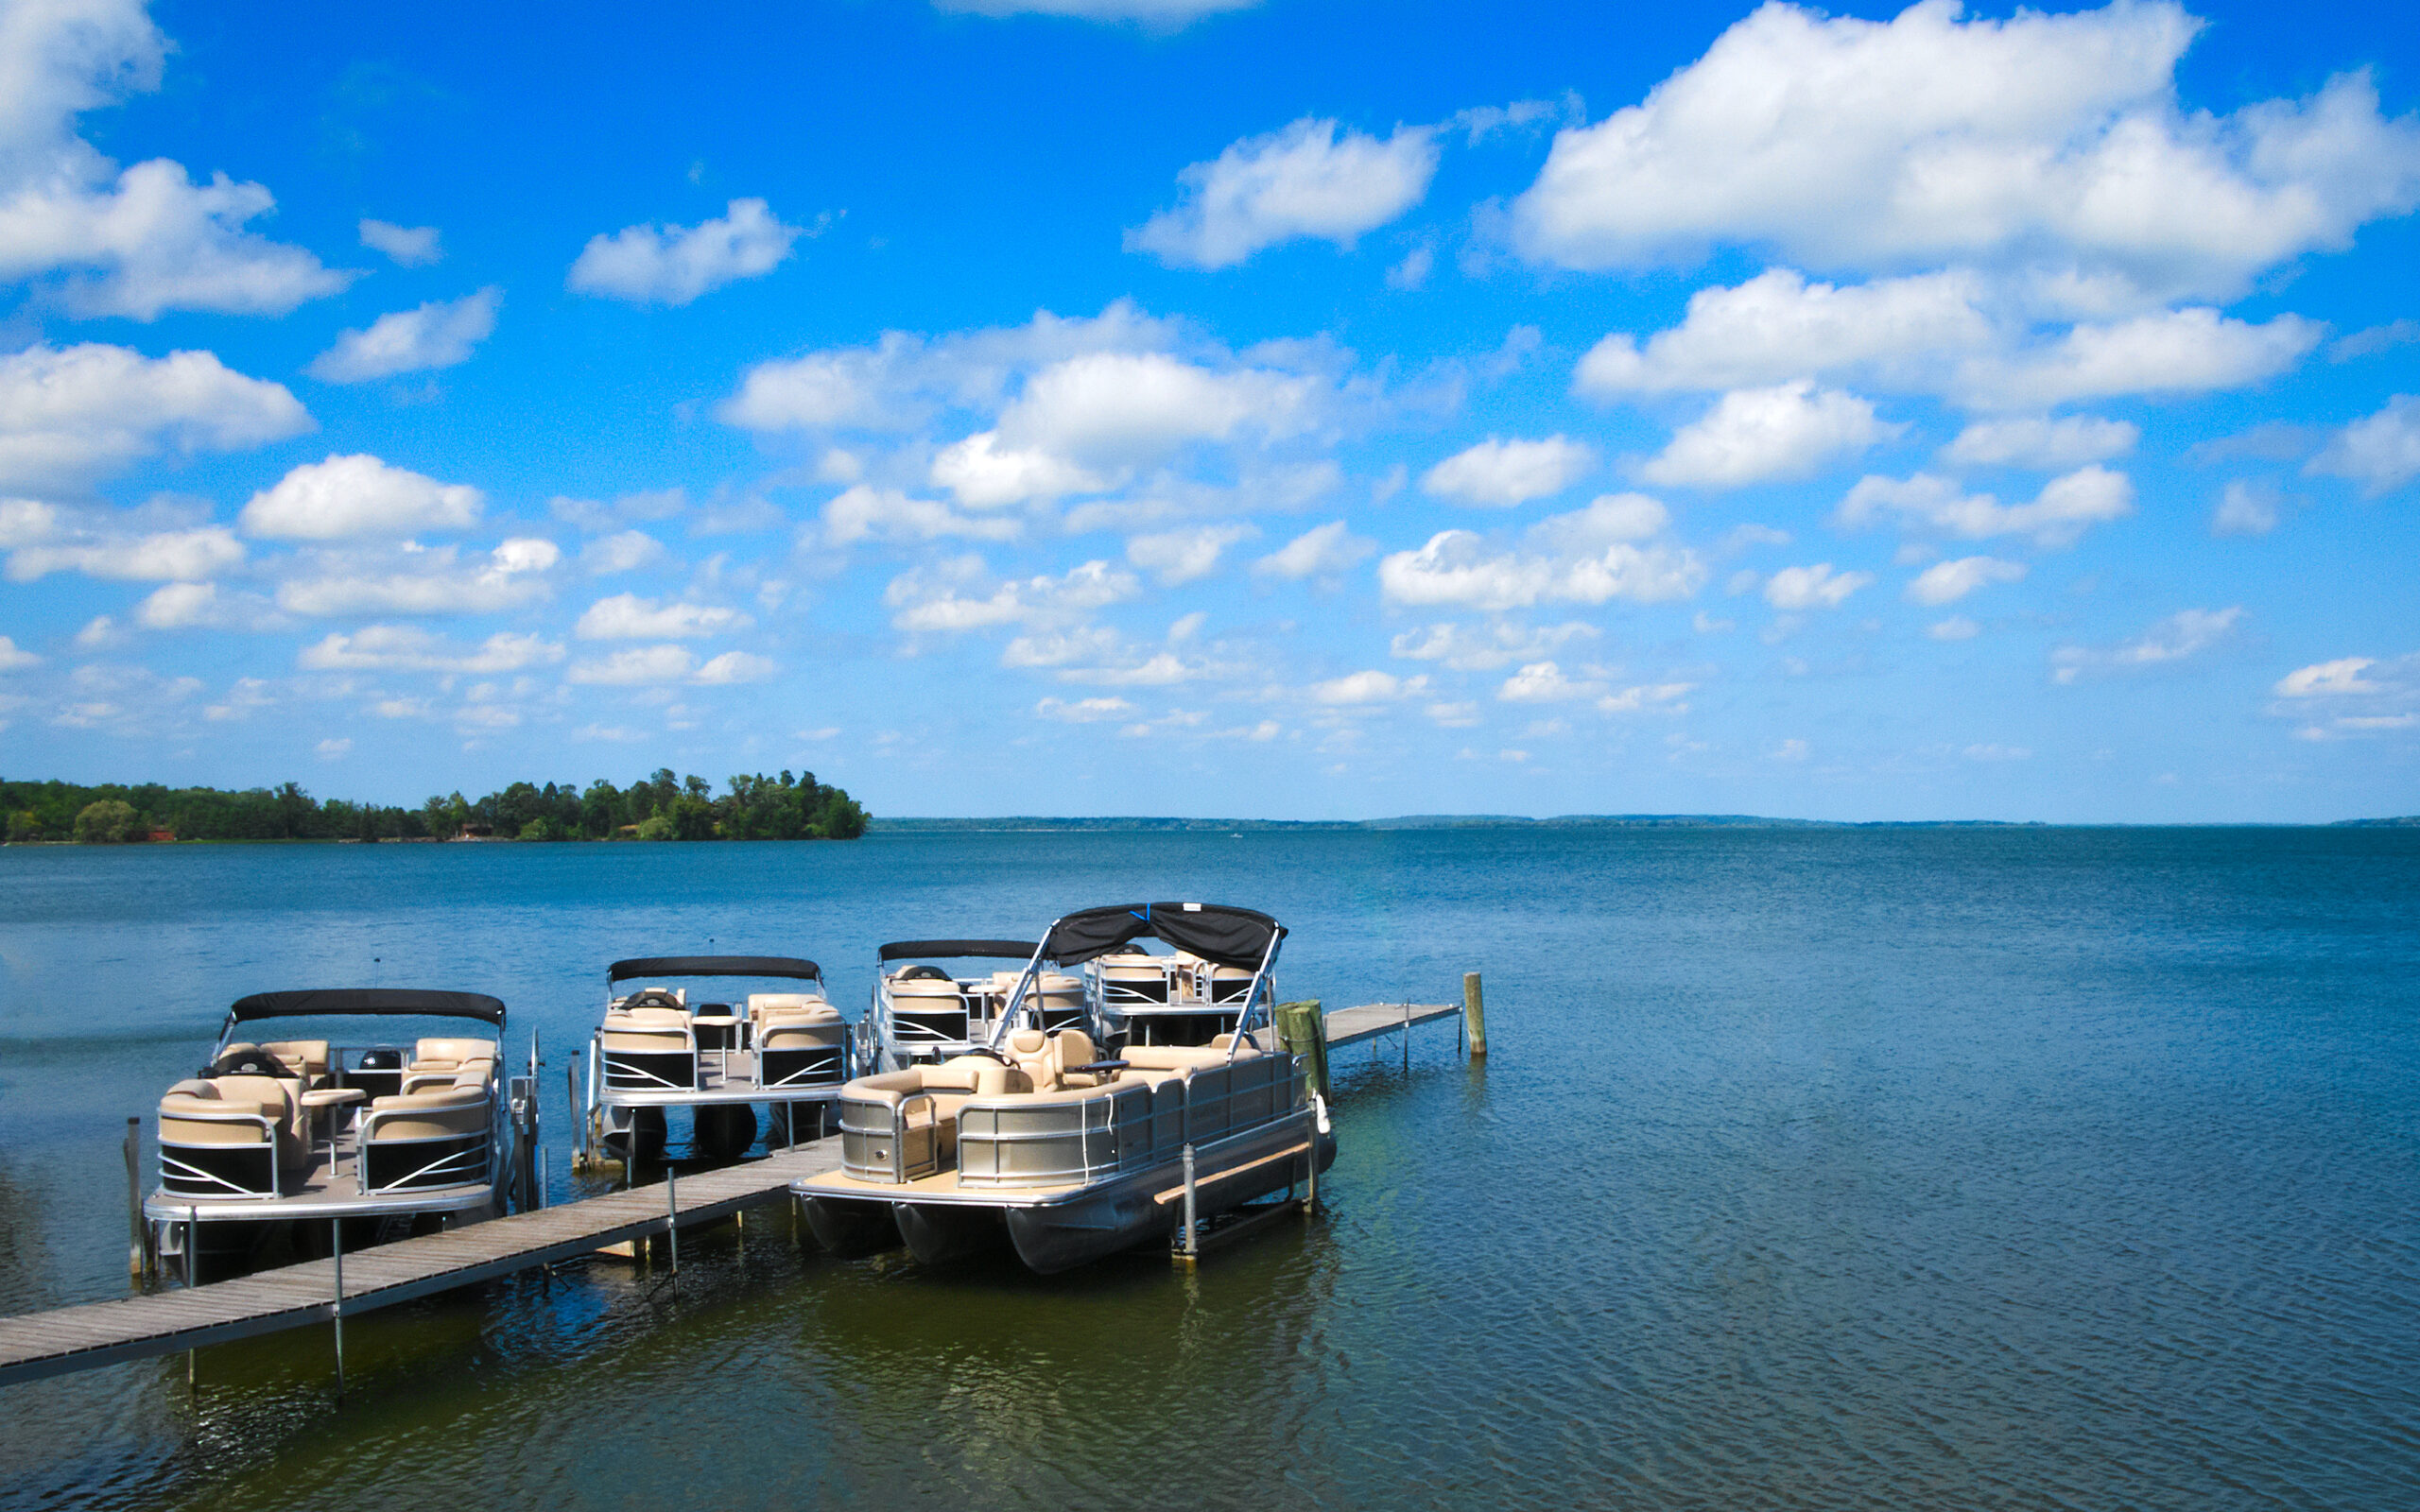 From Leisurely to Lively: Fast Pontoon Boats Are Making Waves